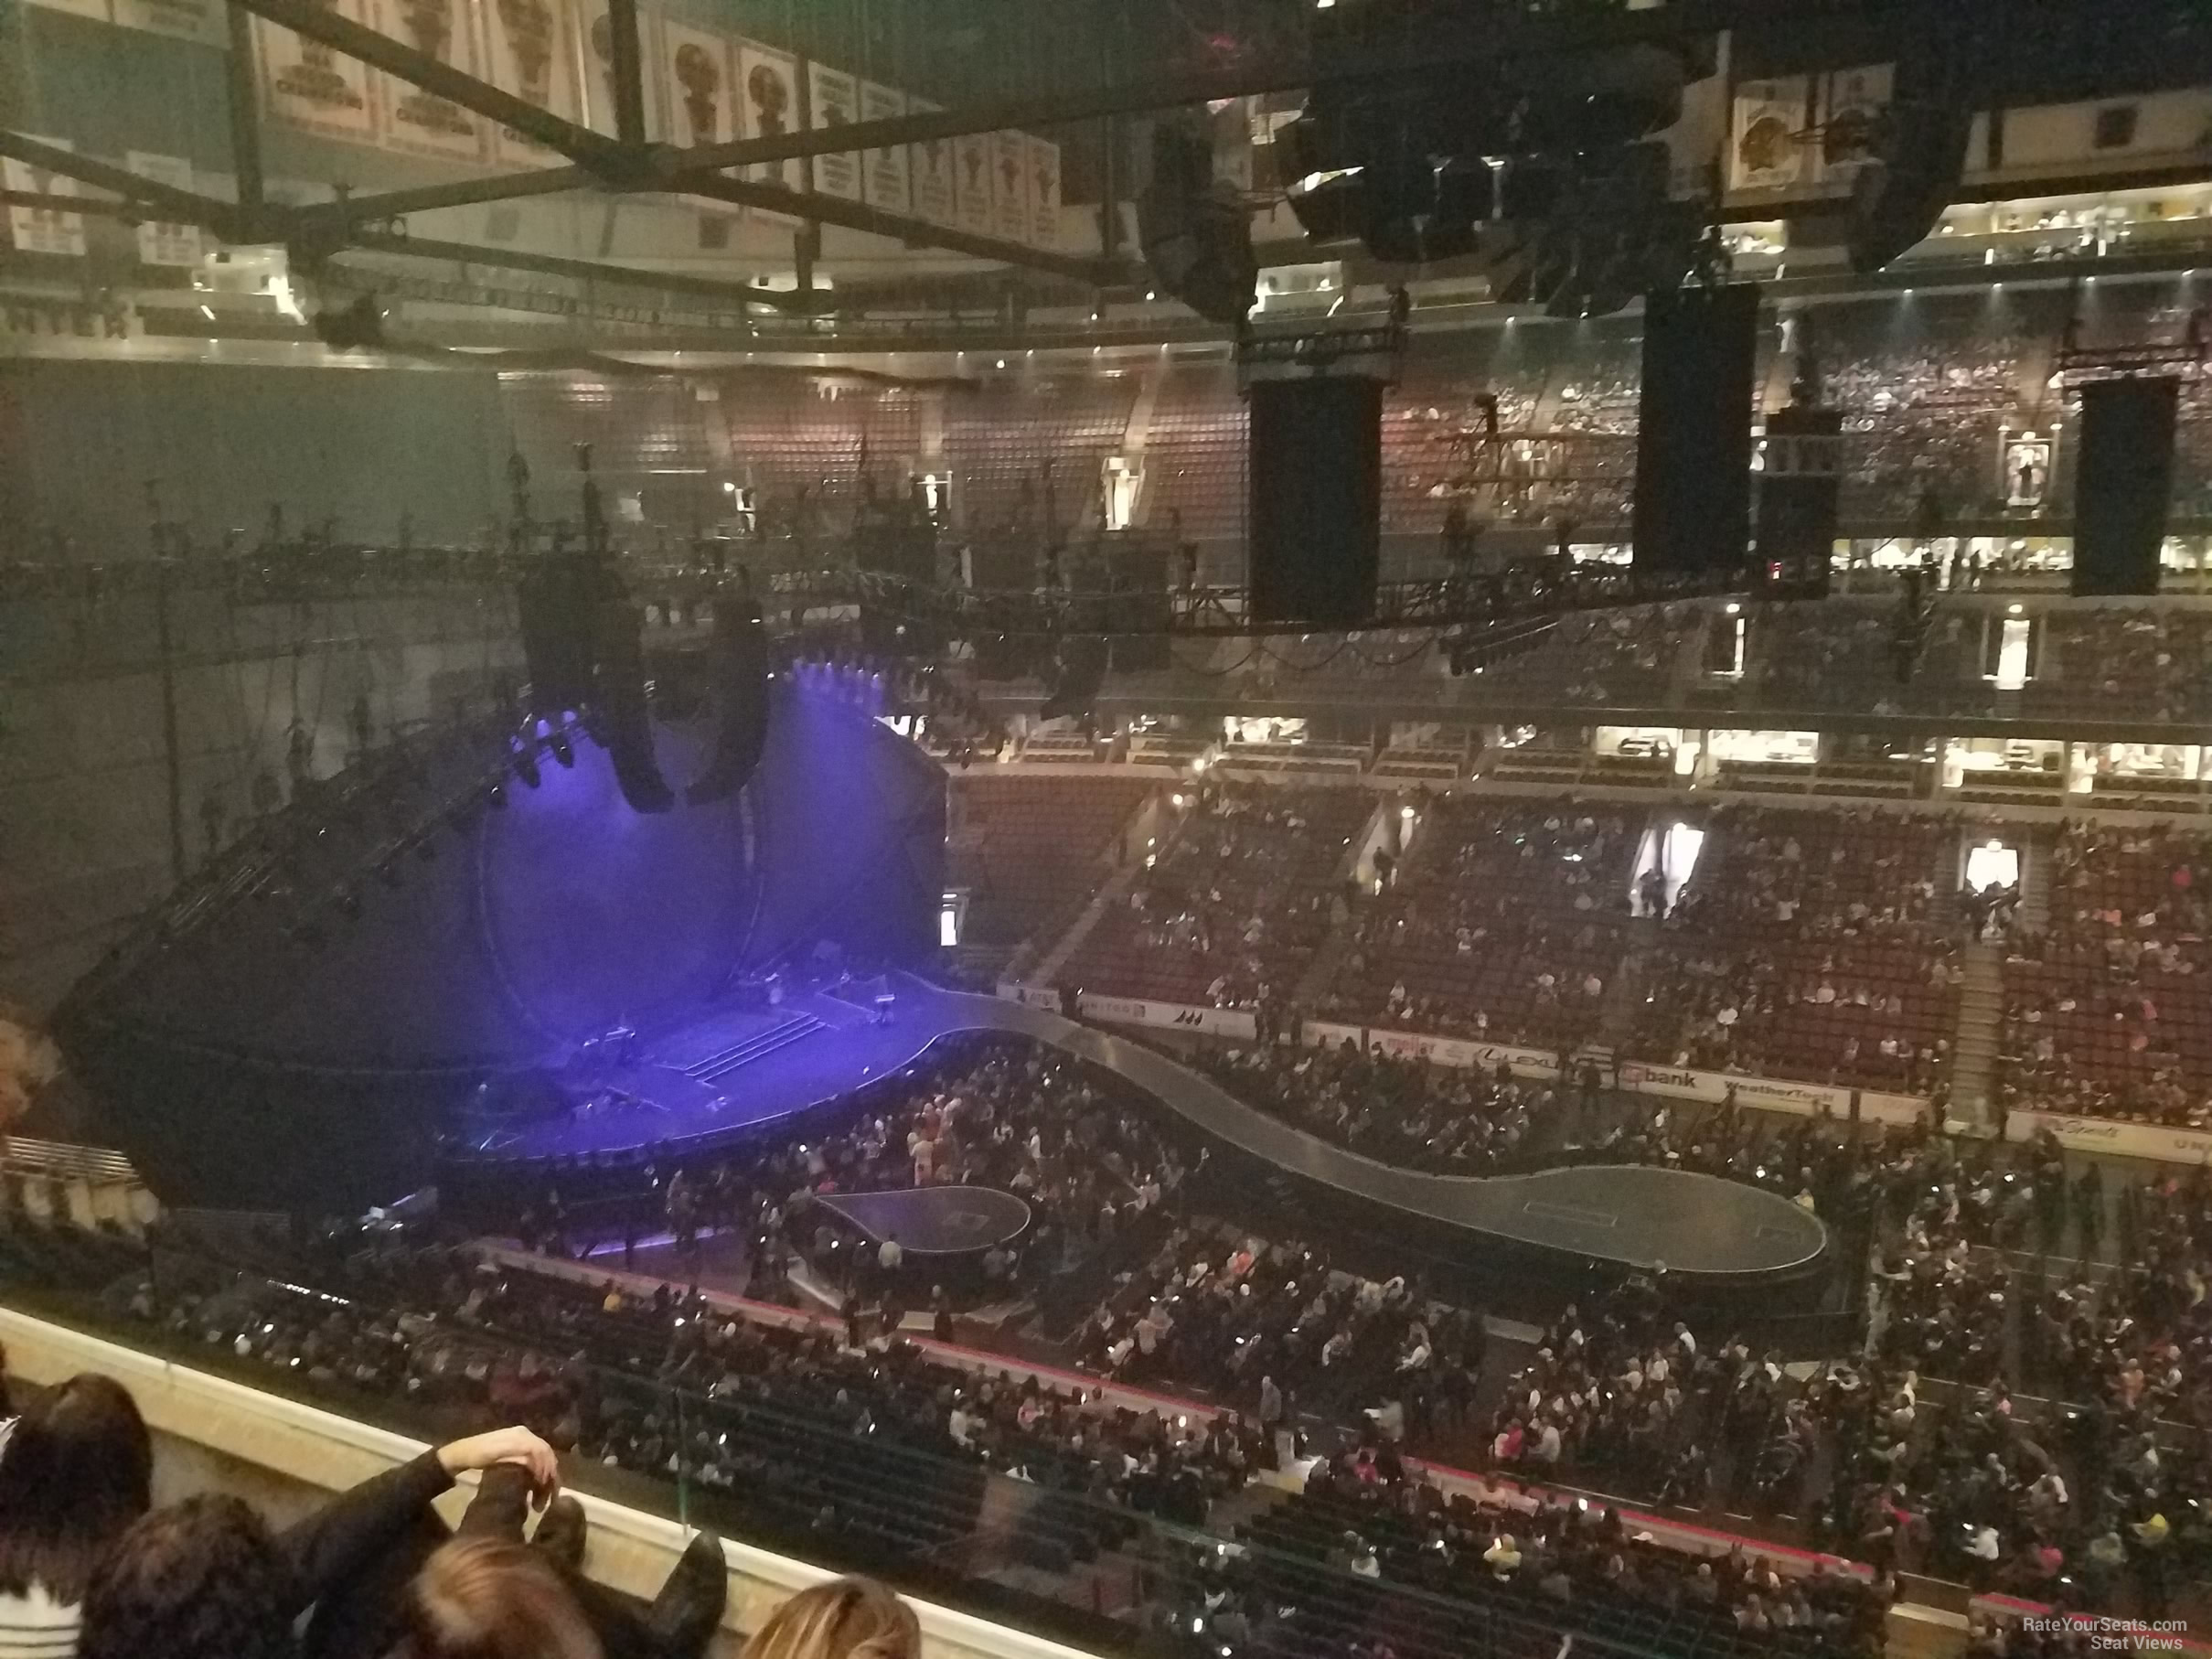 section 317, row 4 seat view  for concert - united center